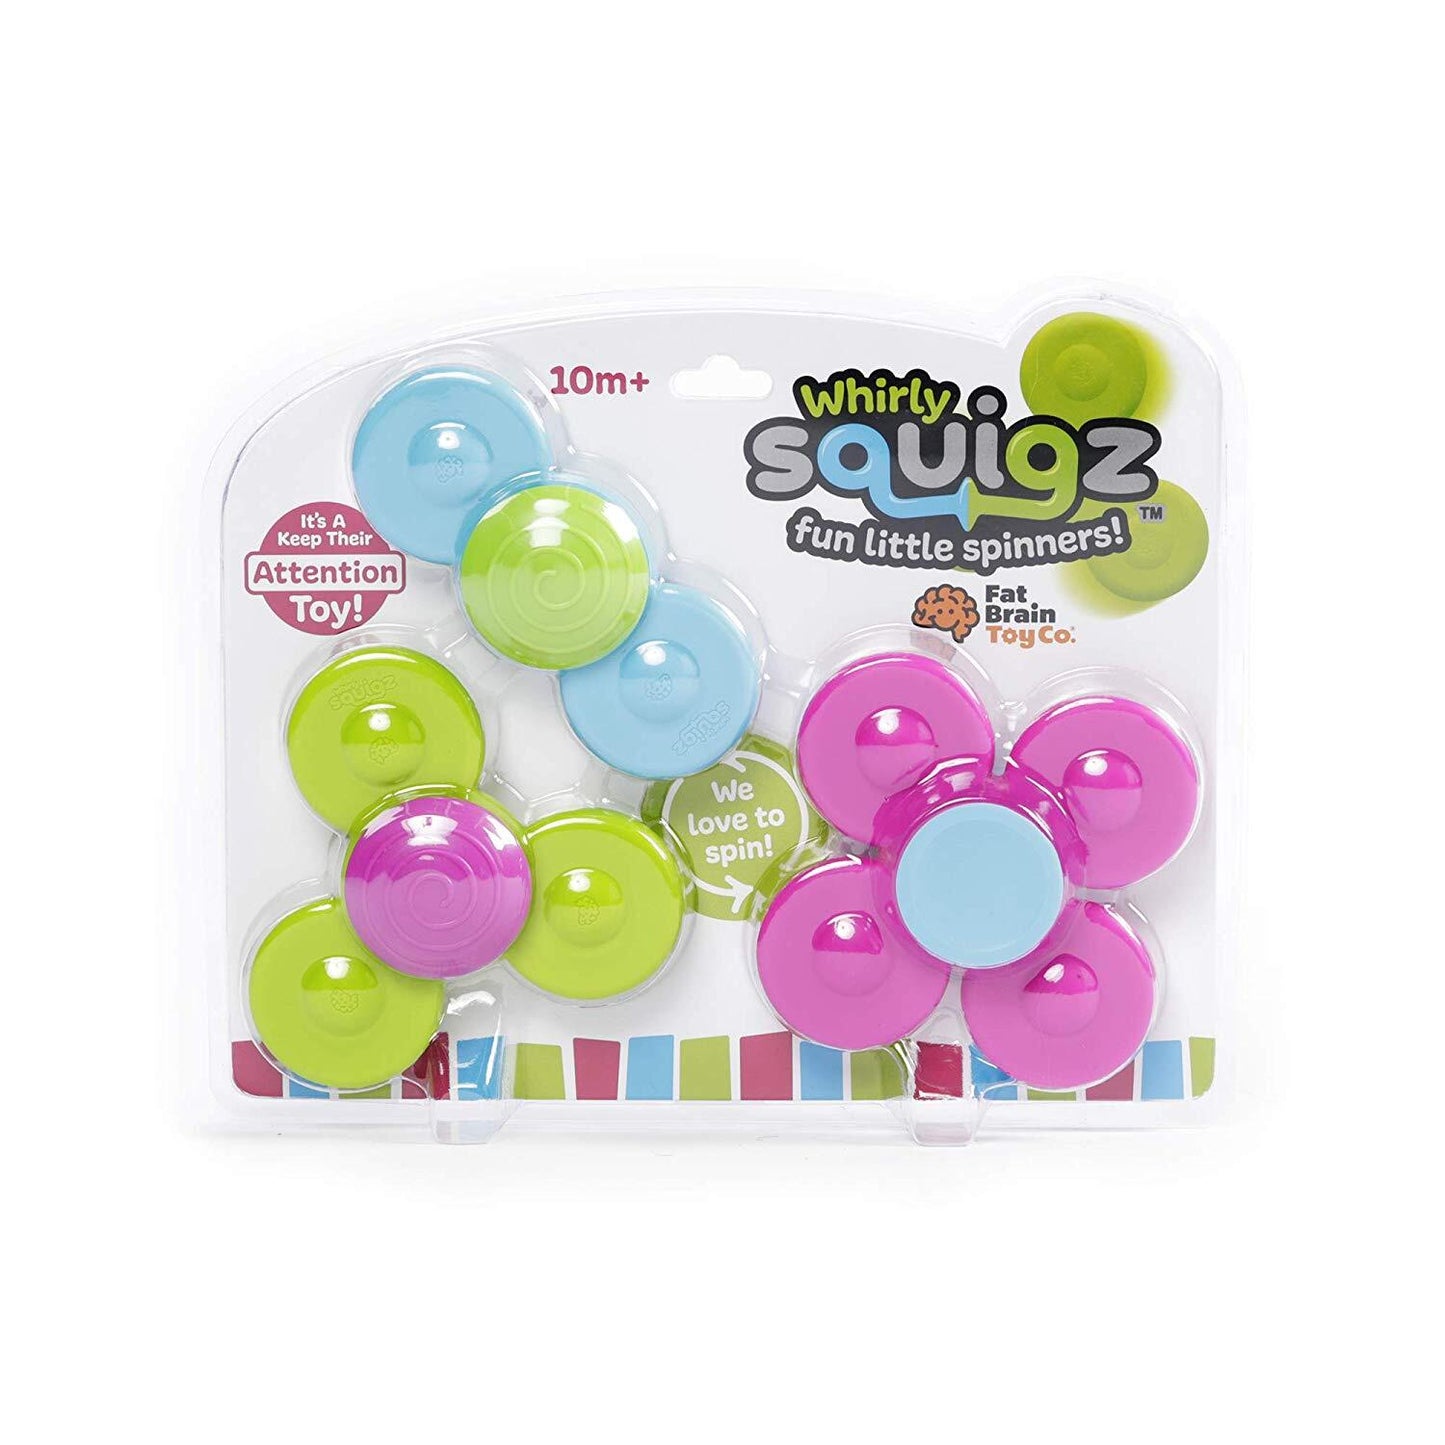 Fat Brain Toys - Whirly Squigz